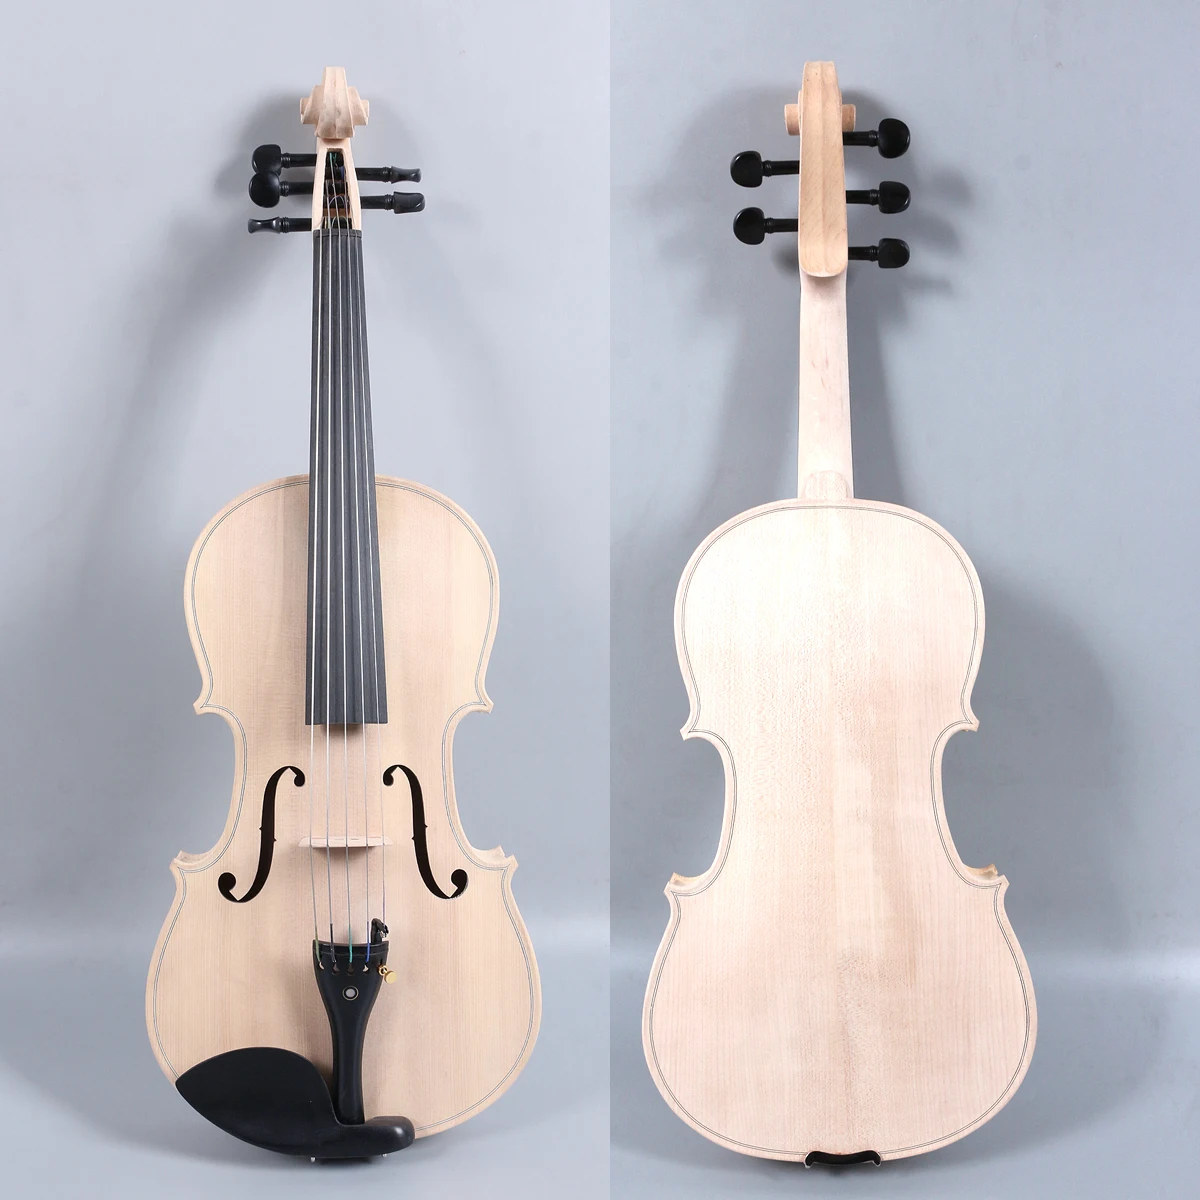 

Yinfente 5string Violin 4/4 Unfinished Violin Ebony Fittings Flame Maple Spruce Wood Free Case Bow